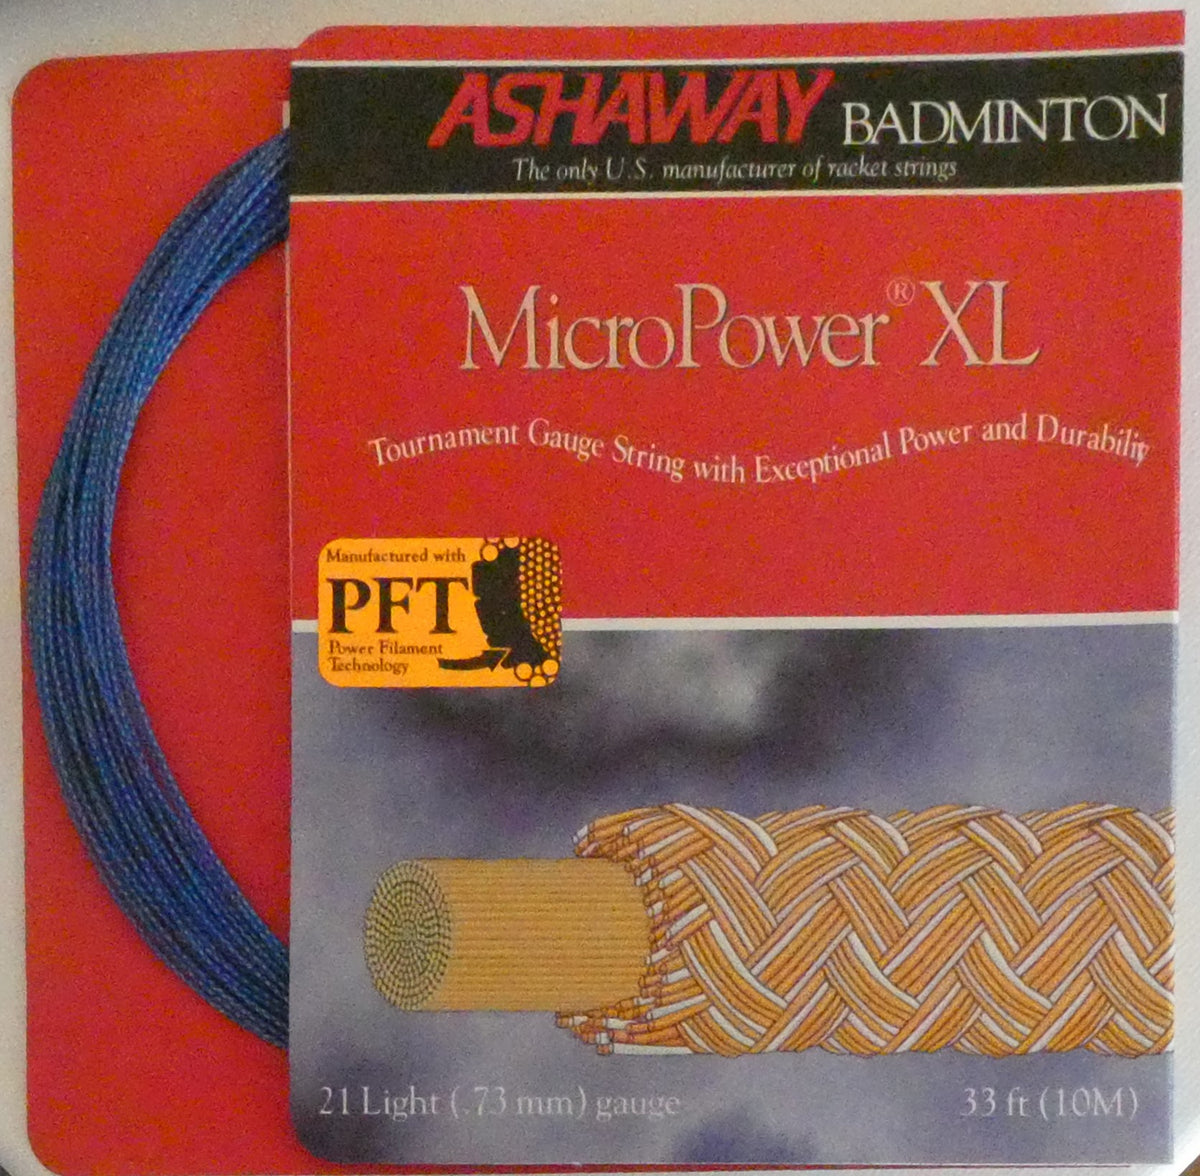 Ashaway MicroPowerXL Badminton String, Blue with Electric Blue spiral, 10 M REEL